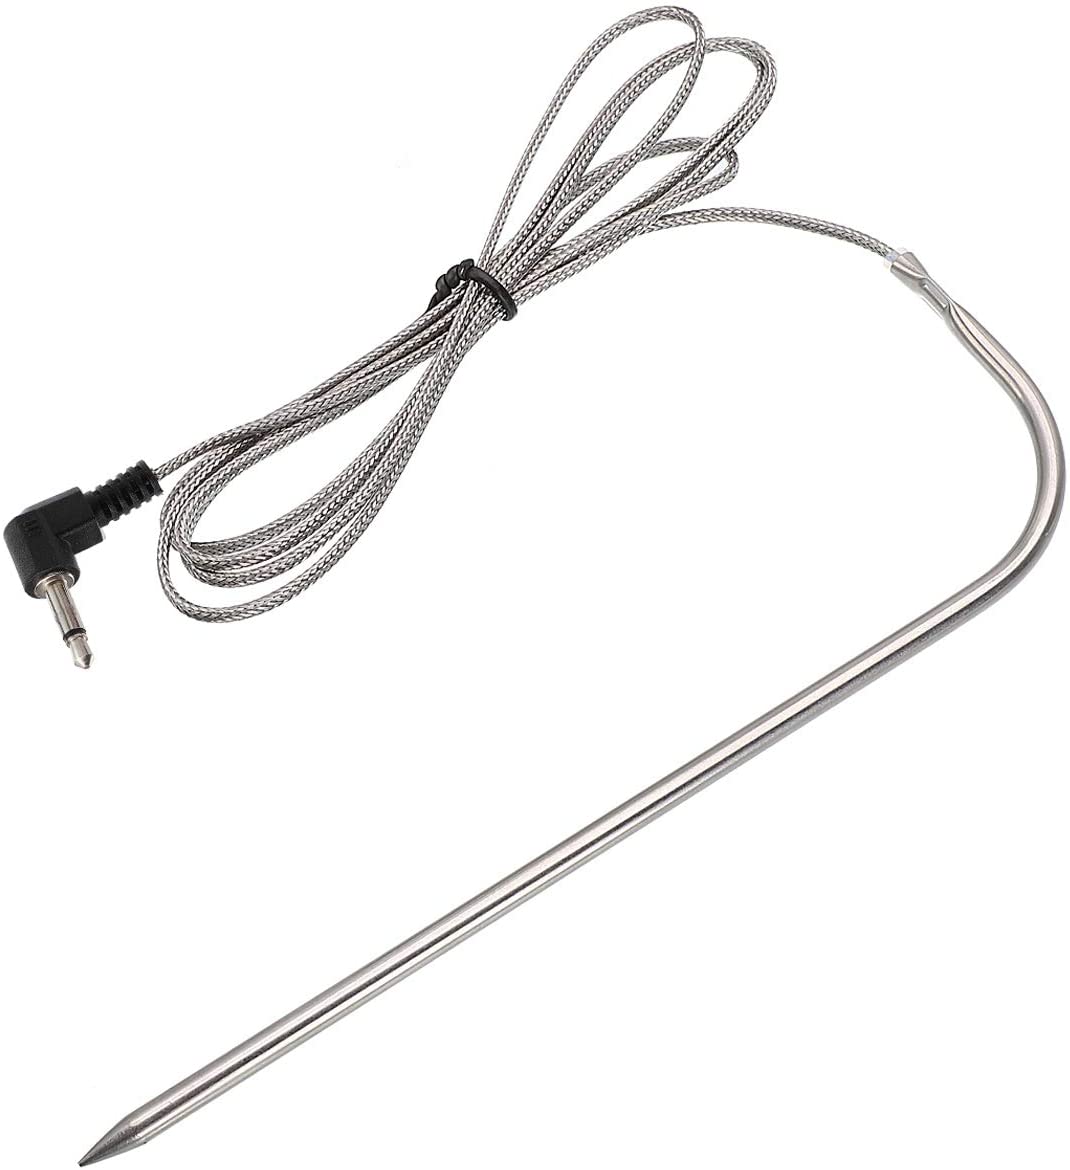 3.5mm Plug Meat Probe for Pit Boss 7 Series Vertical Smoker (PBV7P1) Grills, Replacement High Temperature BBQ Digital Thermostat Meat Probes